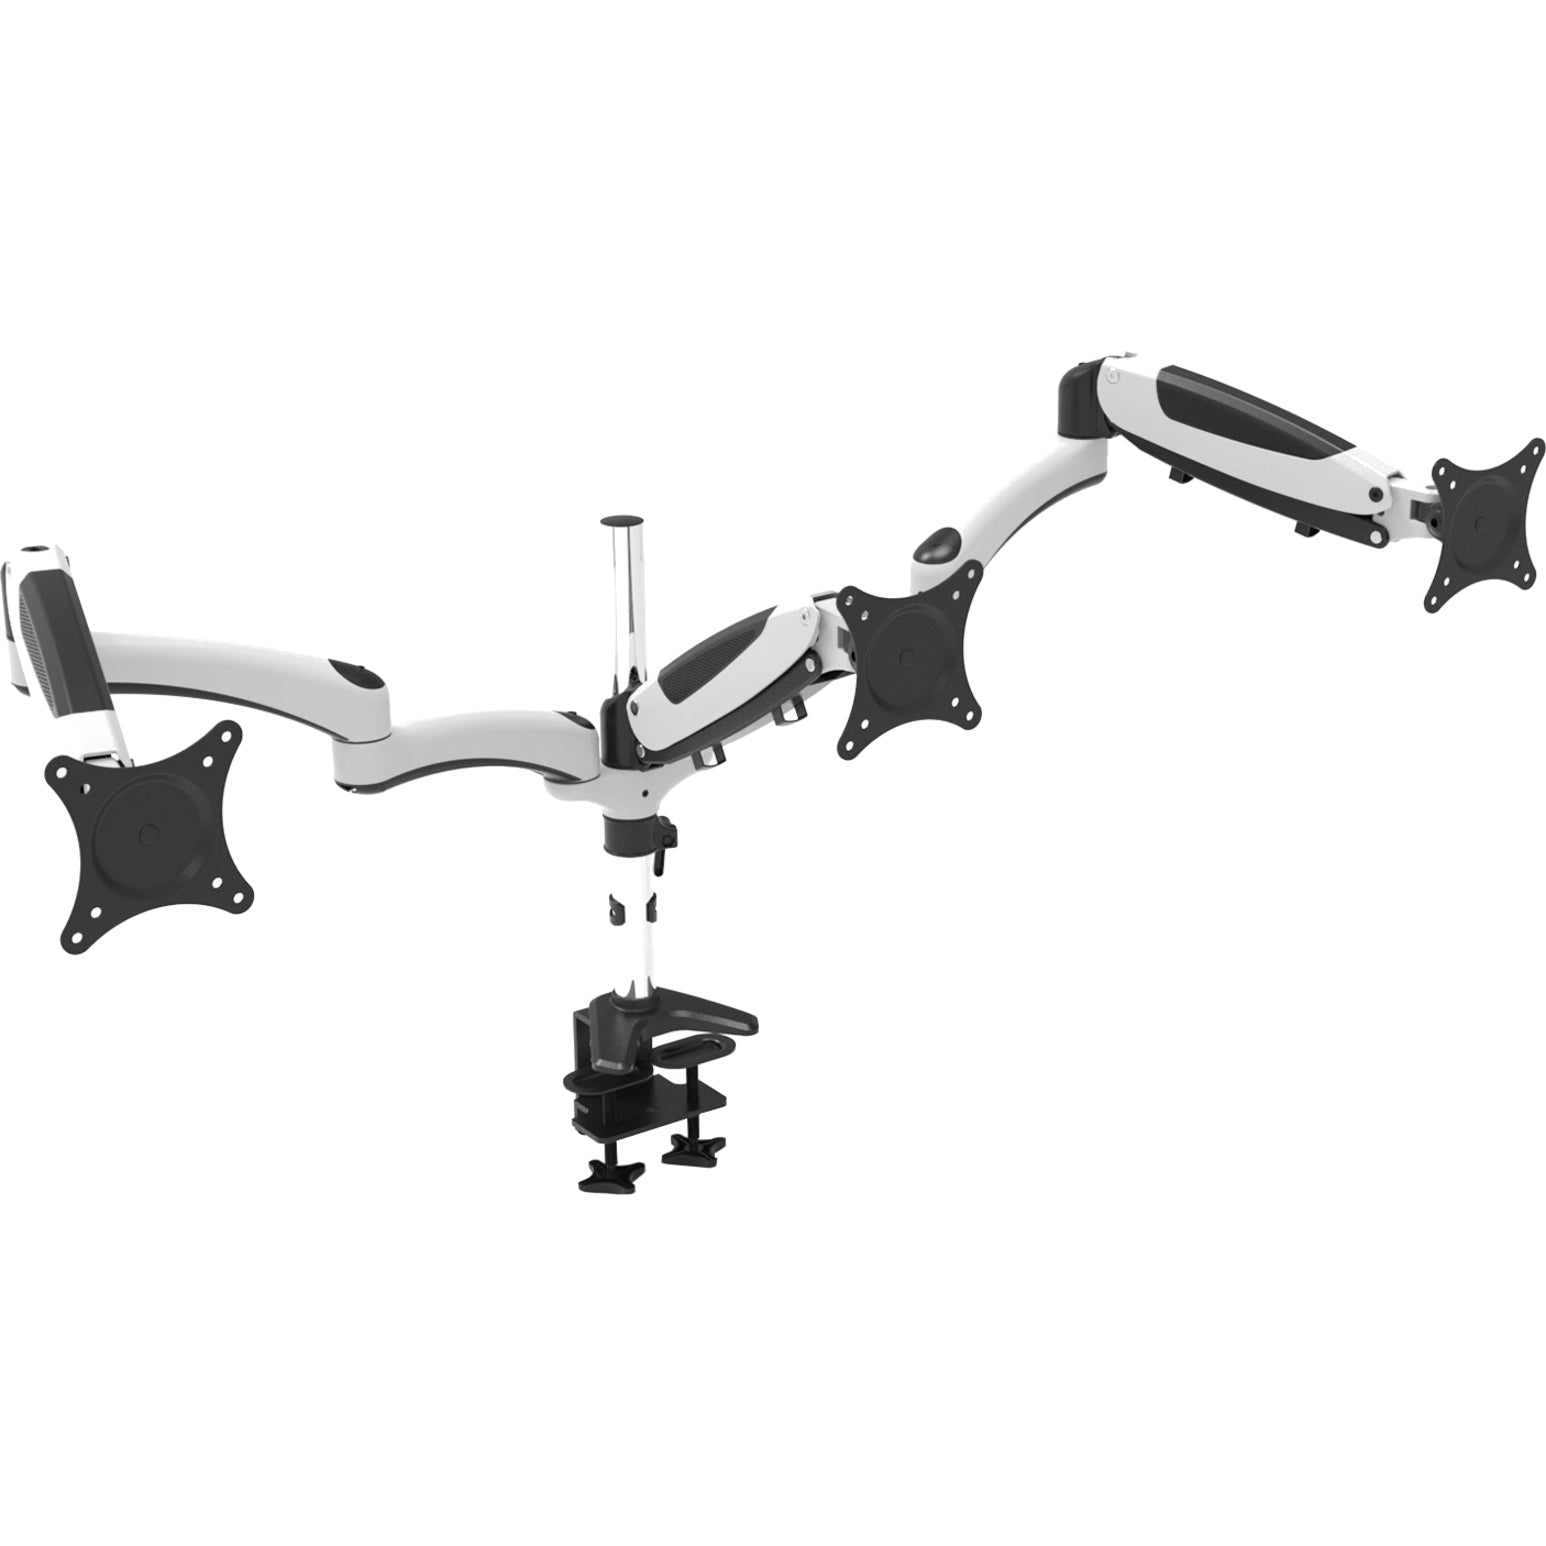 Amer Mounts HYDRA3XL Triple Monitor Mount with Articulating Arms, Cable Management, Ergonomic, 360° Rotation, 33 lb Load Capacity